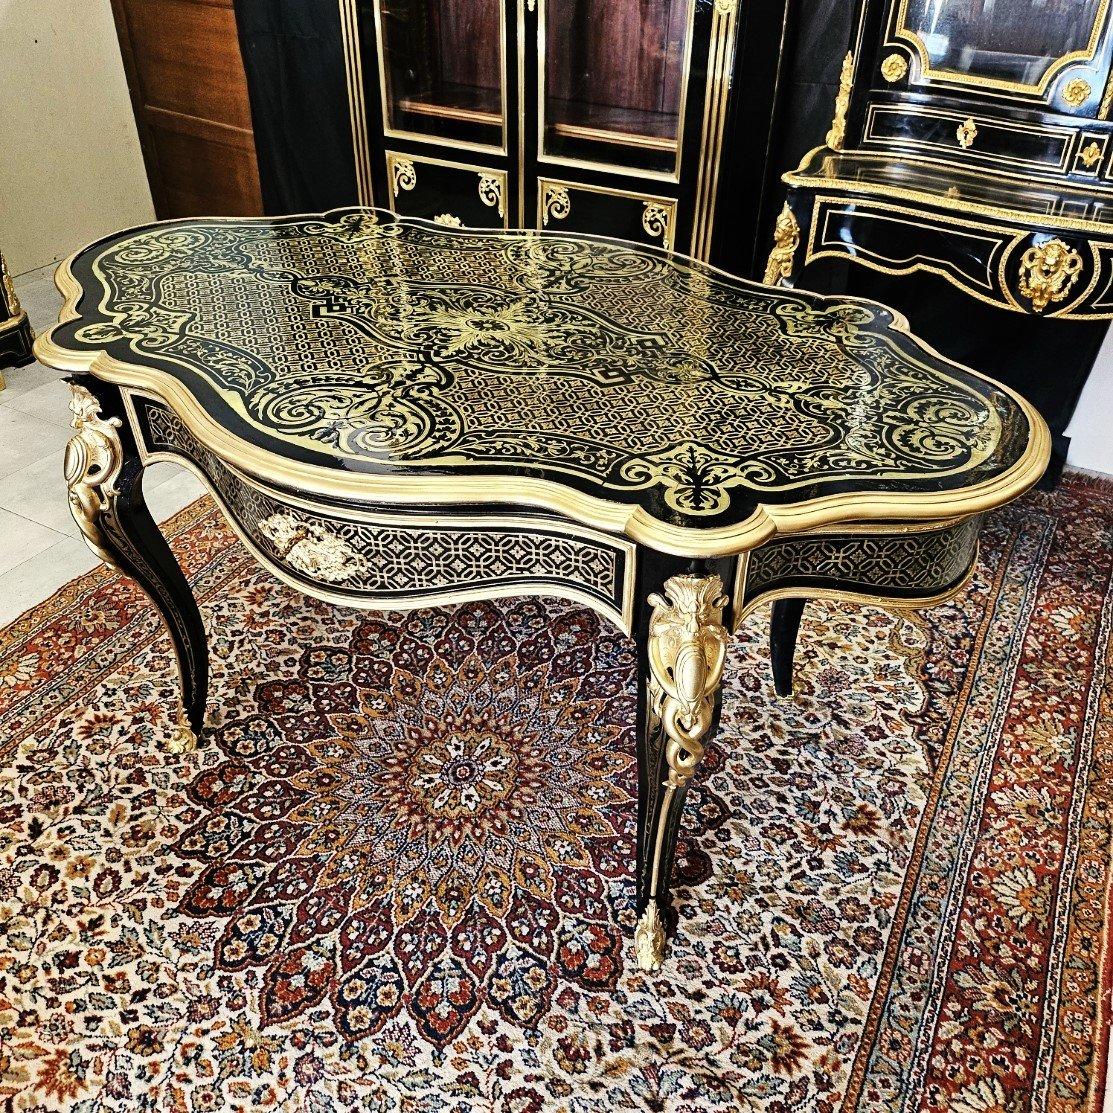 Diehl Black French Table Napoleon III Boulle Brass Gilt Bronze 19th Century For Sale 6